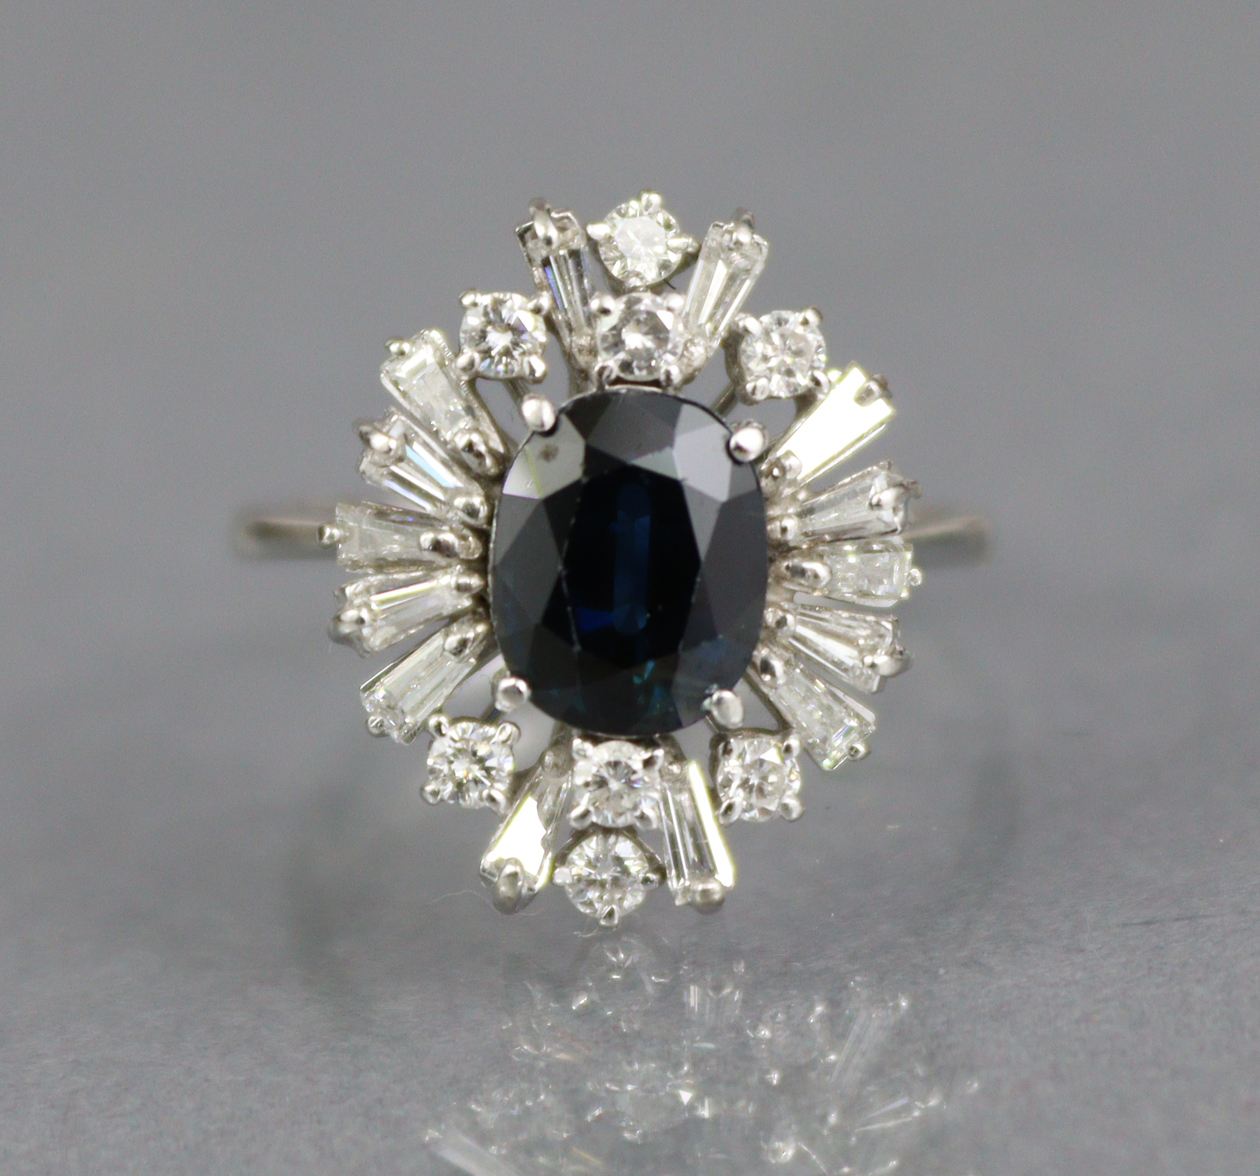 A SAPPHIRE & DIAMOND RING, the oval-cut sapphire approx. 2 carats set within a radiating border of